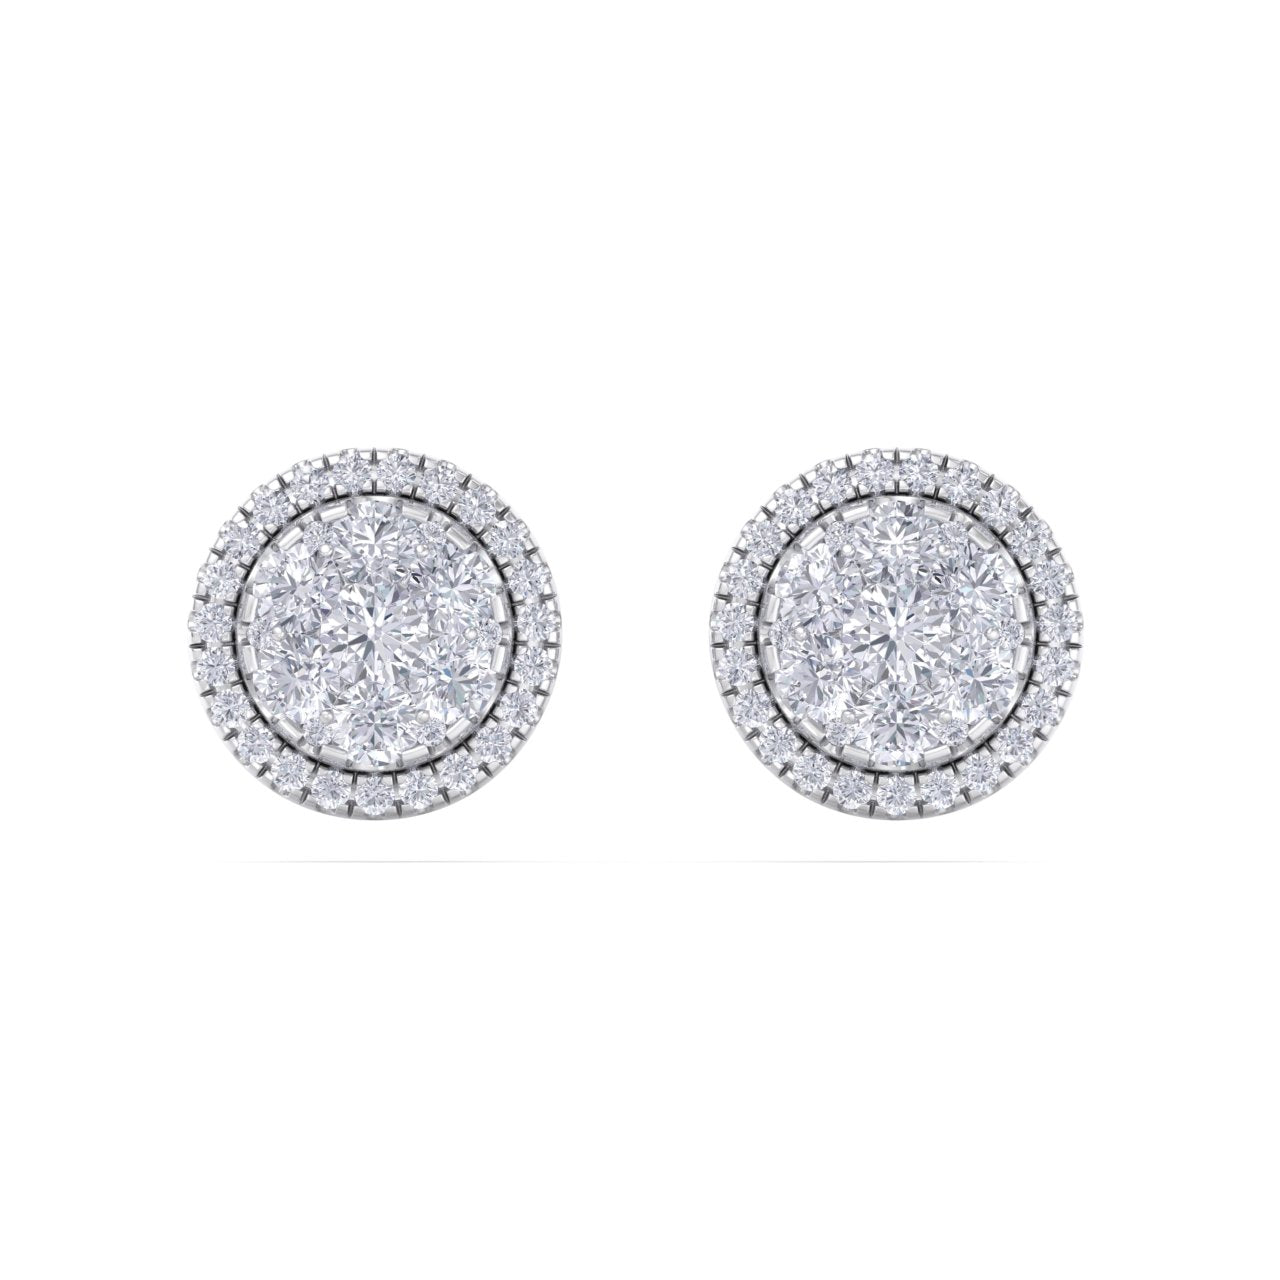 Round halo stud earrings in rose gold with white diamonds of 1.08 ct in weight